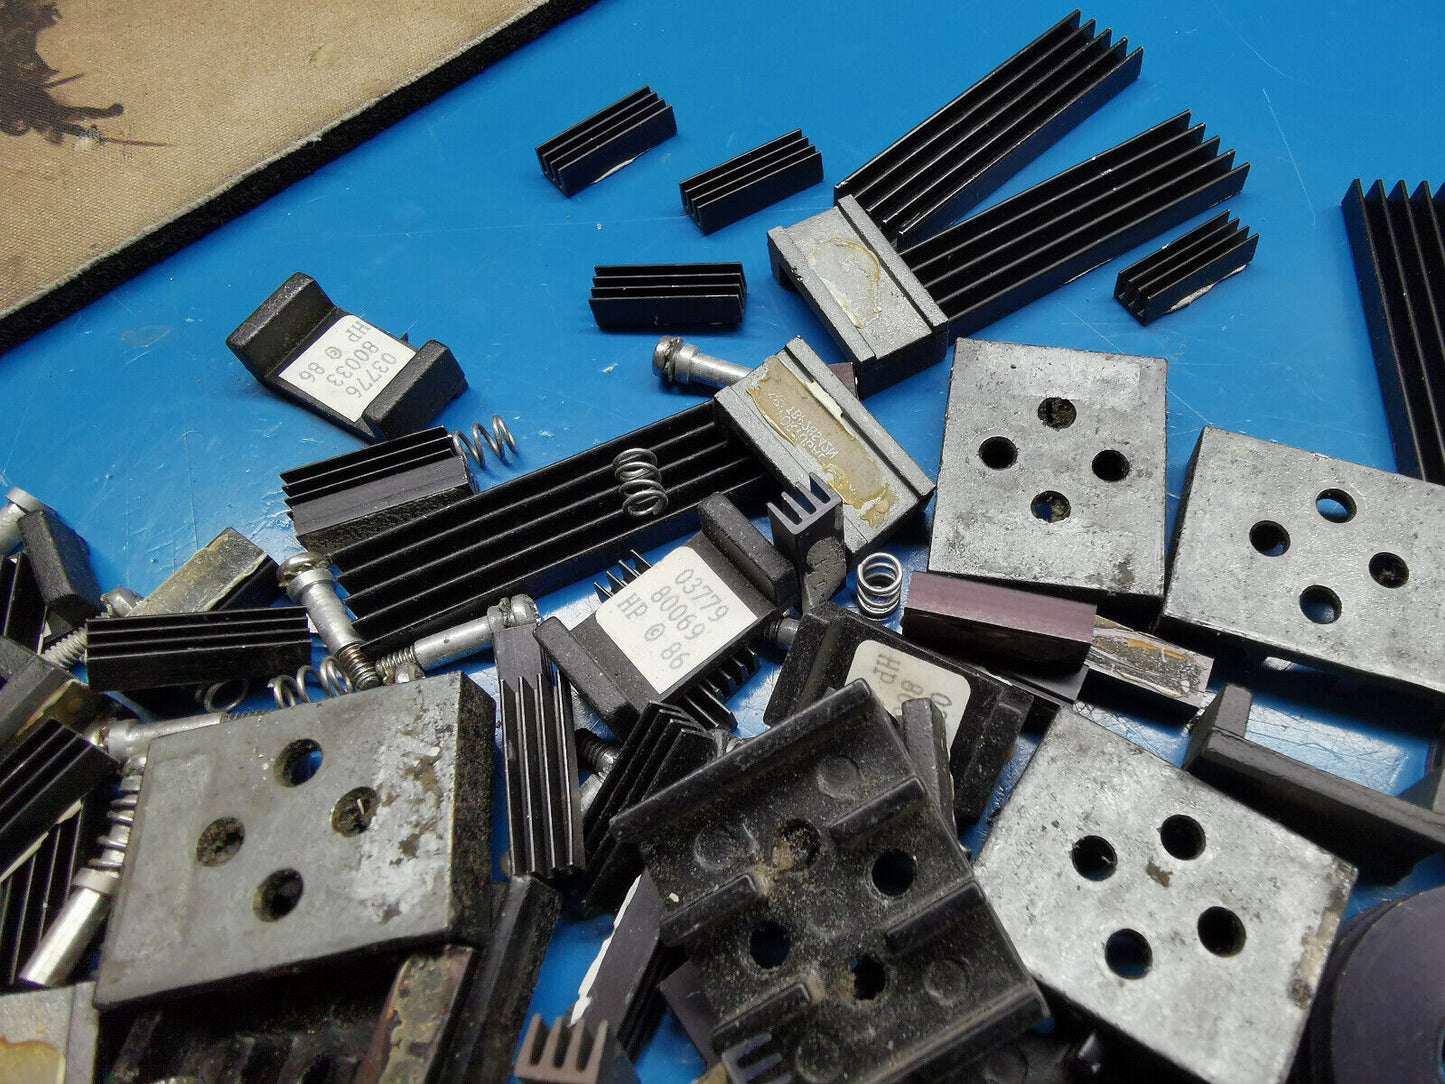 Avvid Thermalloy Heat Sink Joblot For IC And Other Semiconductors